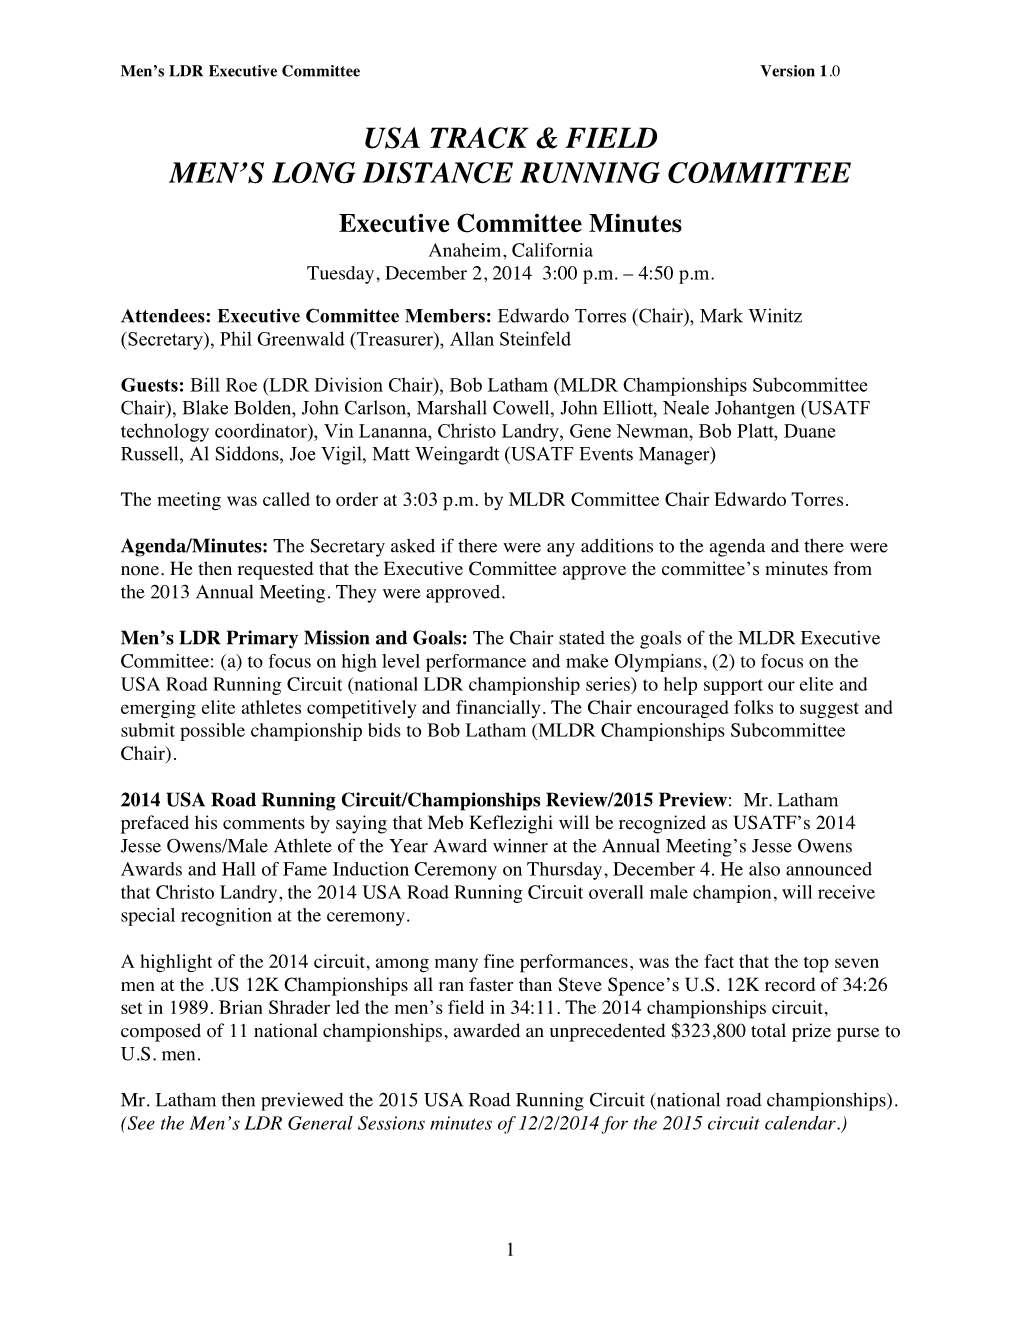 2014 Men's LDR Executive Committee Minutes